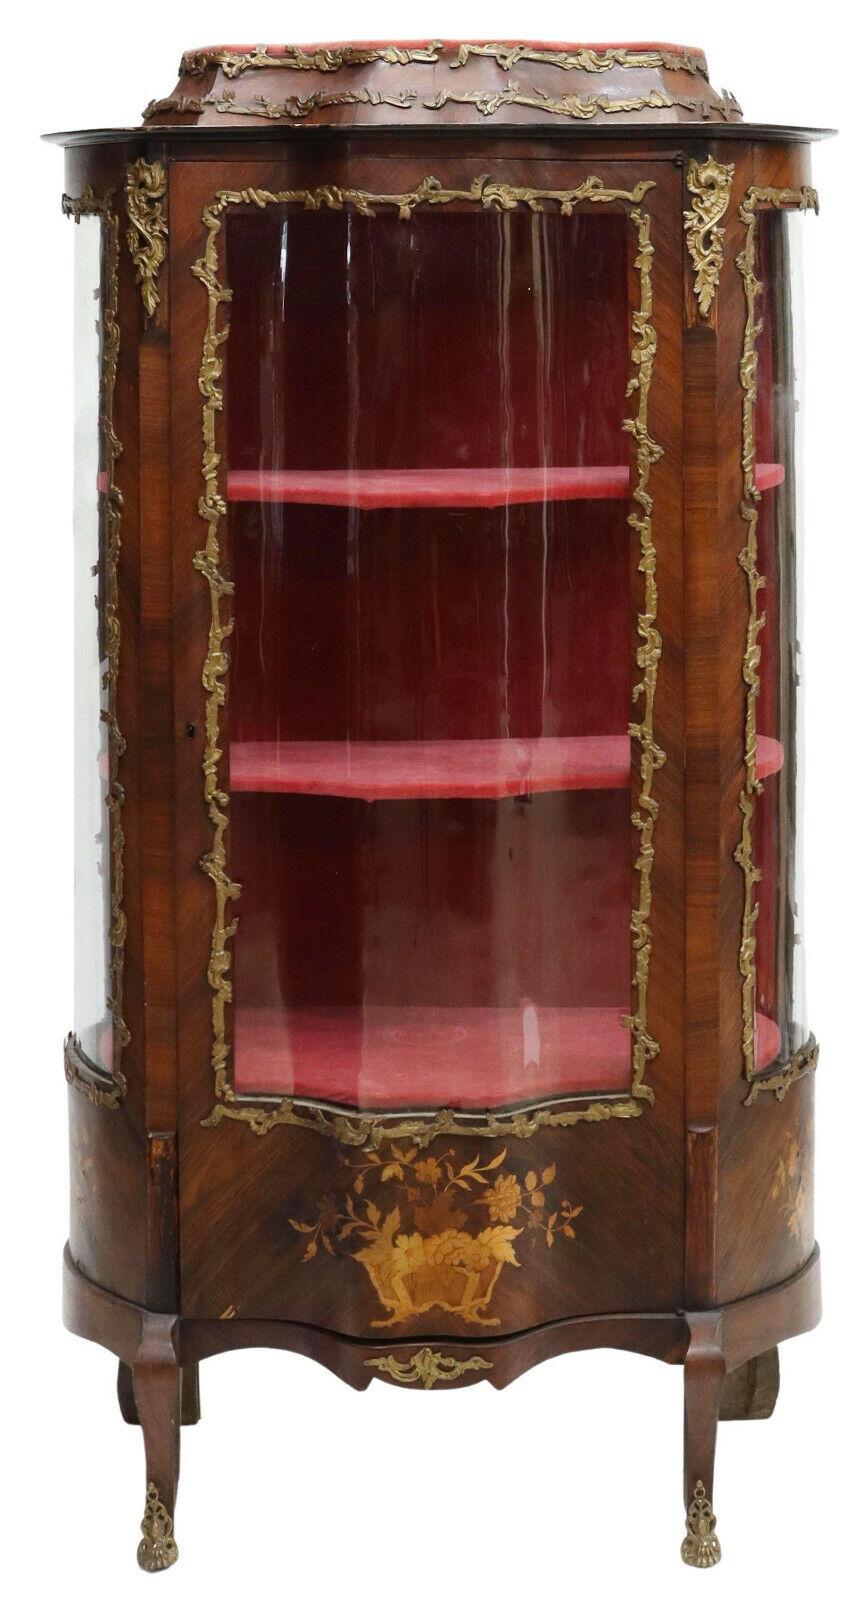 Stunning 1800s Antique French Louis XV Style, Ormulu, Curved, Exceptional Vitrine.

Exceptional French Louis XV style display cabinet, late 19th c., ormolu and marquetry decoration, a mansard top over the curved glass sides with a central door